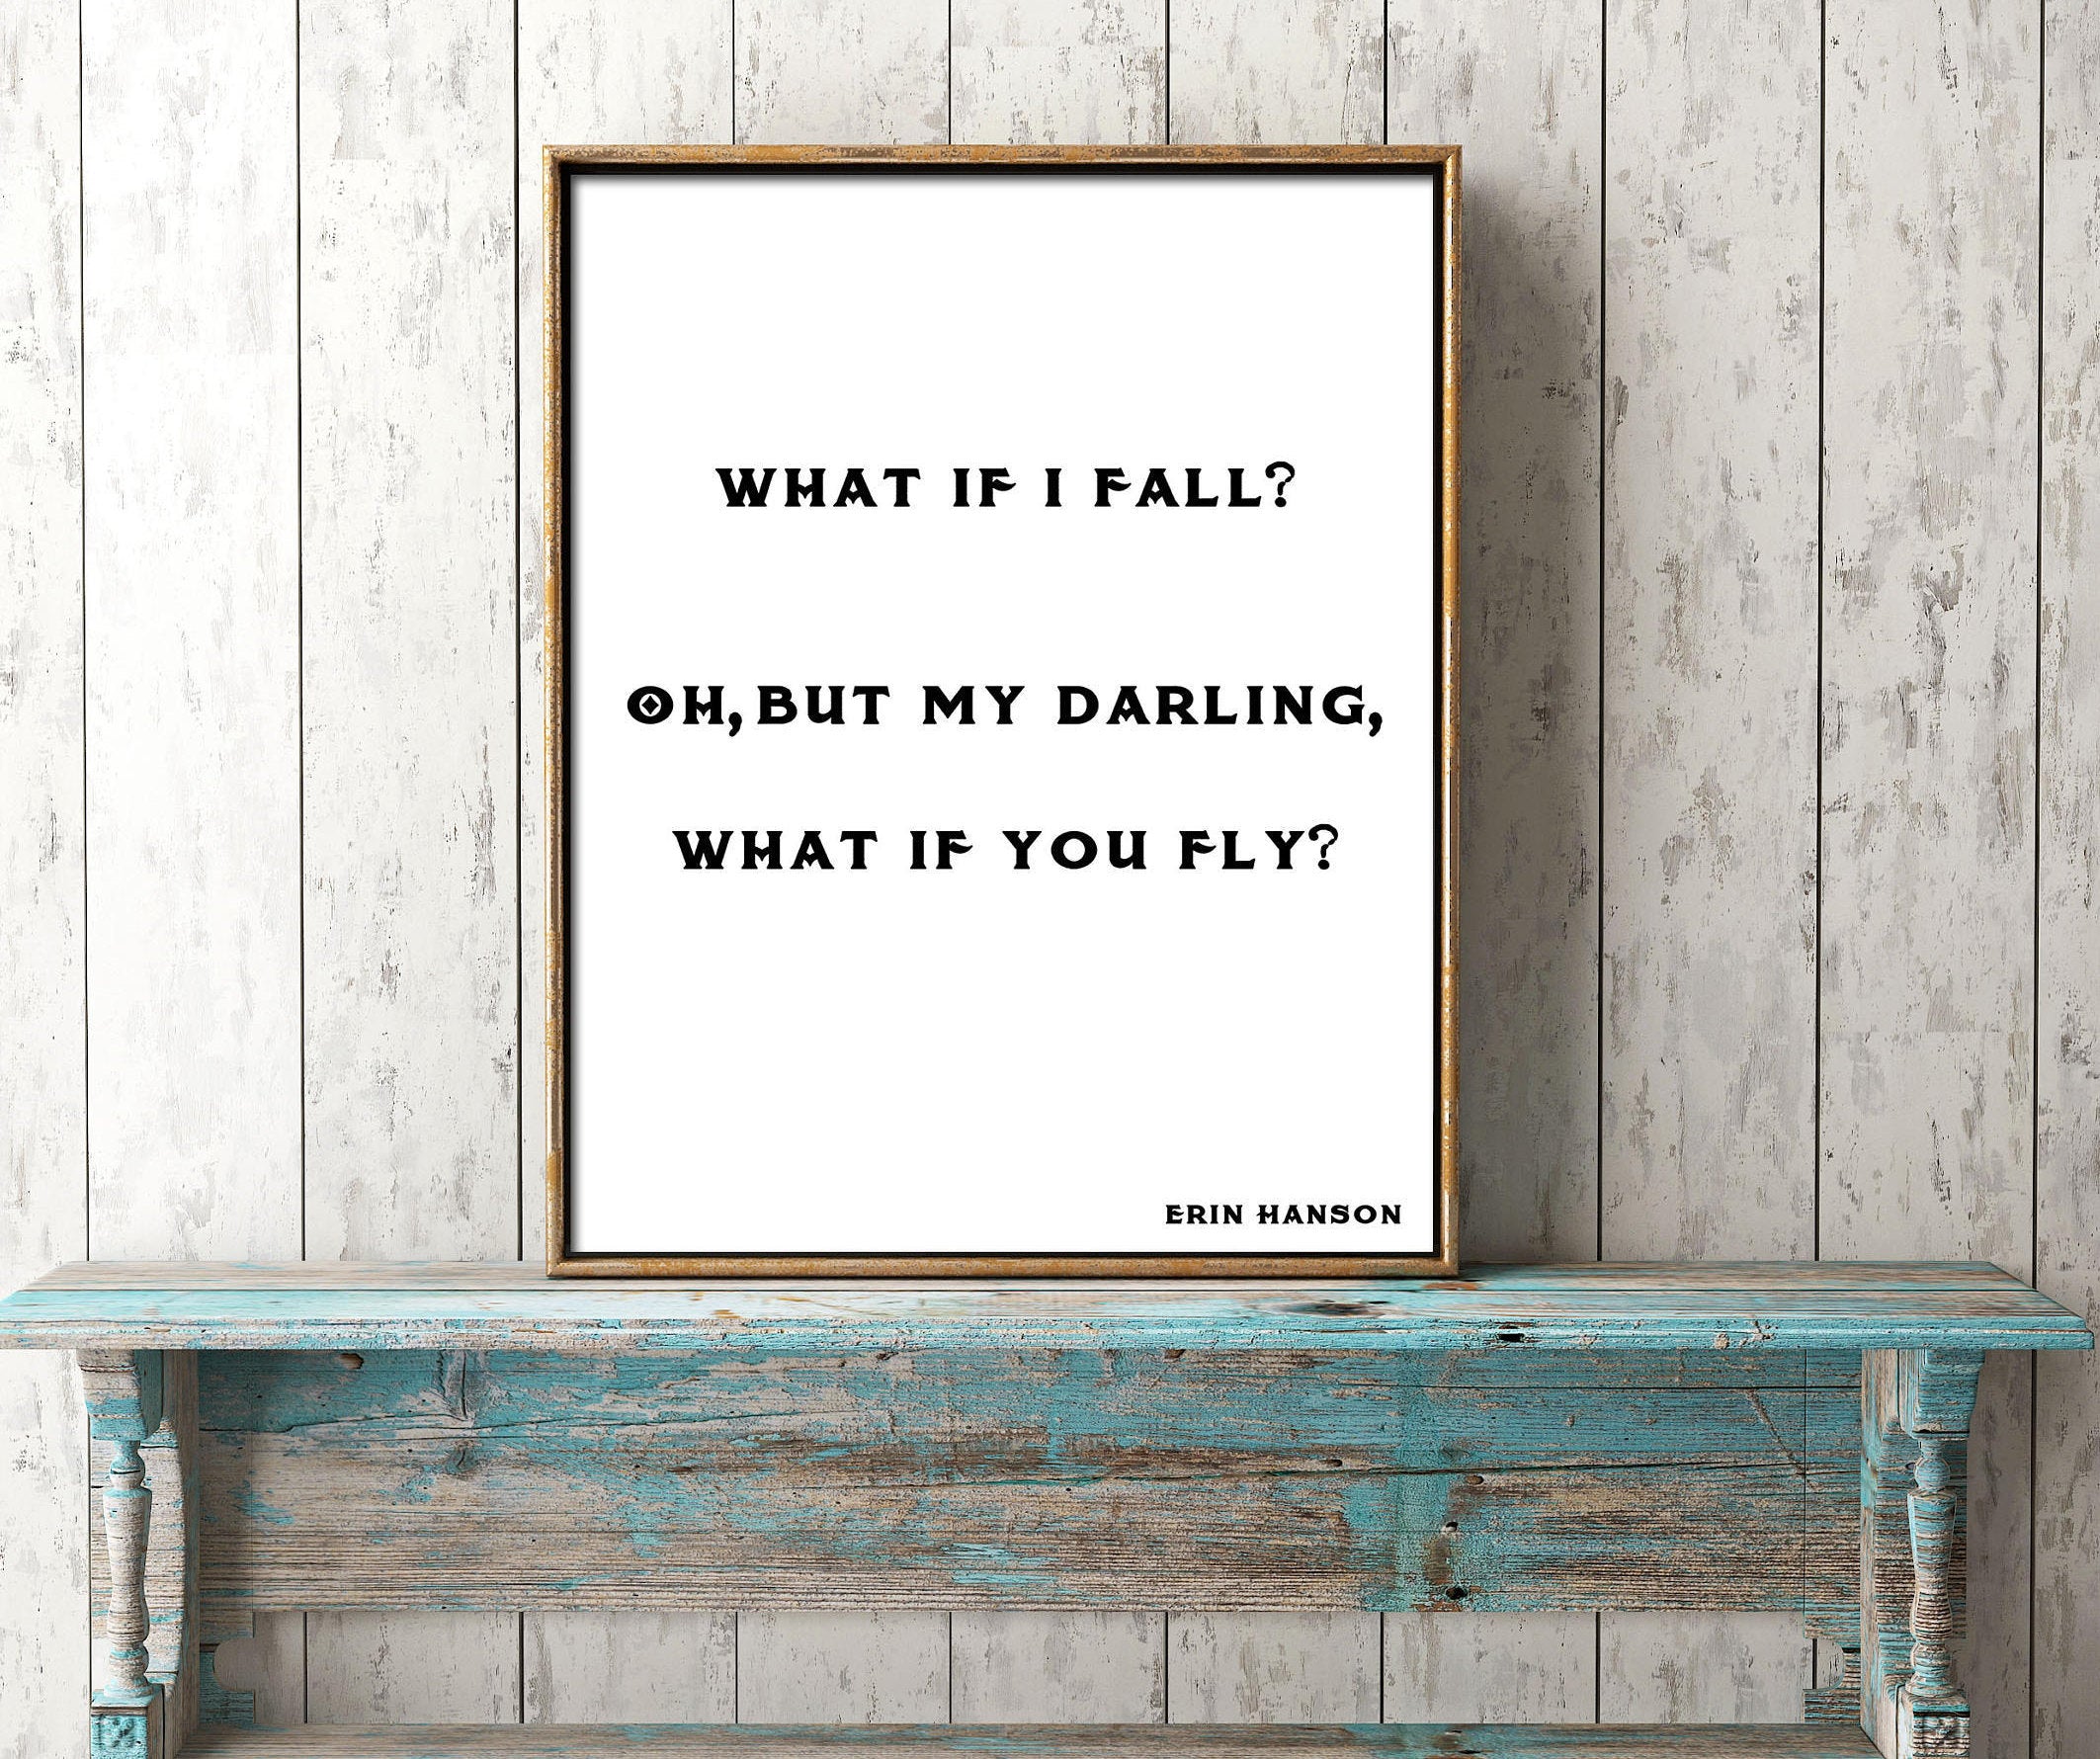 What If You Fly Erin Hanson Inspirational Wall Art for Home Decor, unframed Motivational Poster Wall Art Prints in Black & White